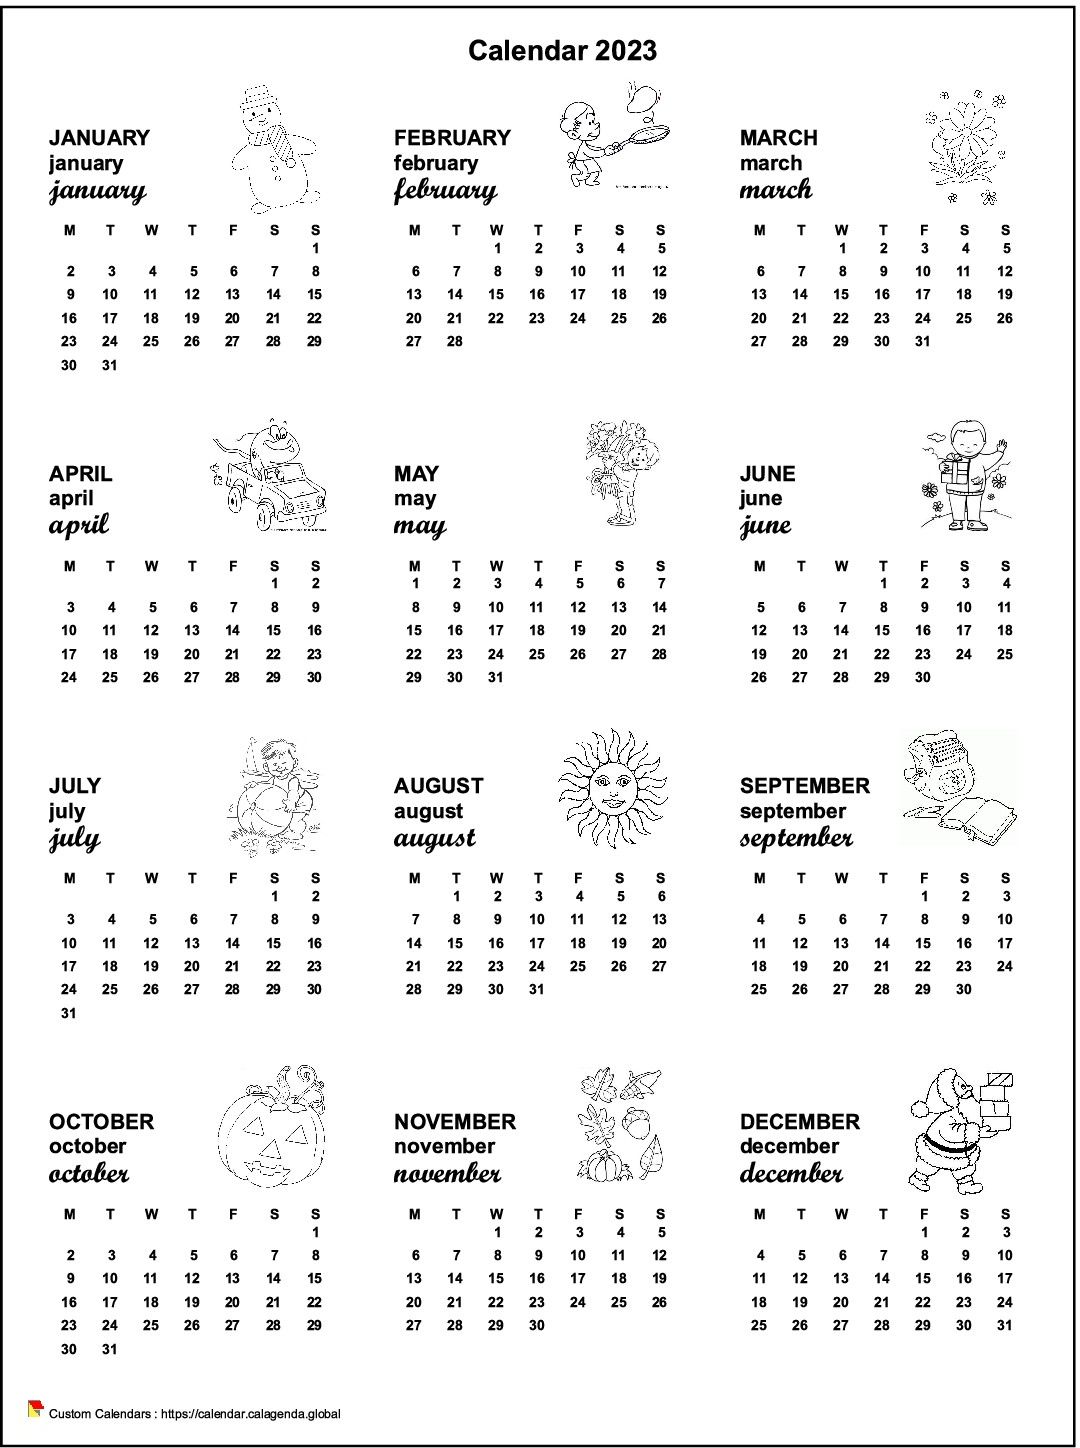 Calendar 2053 annual maternal and primary school